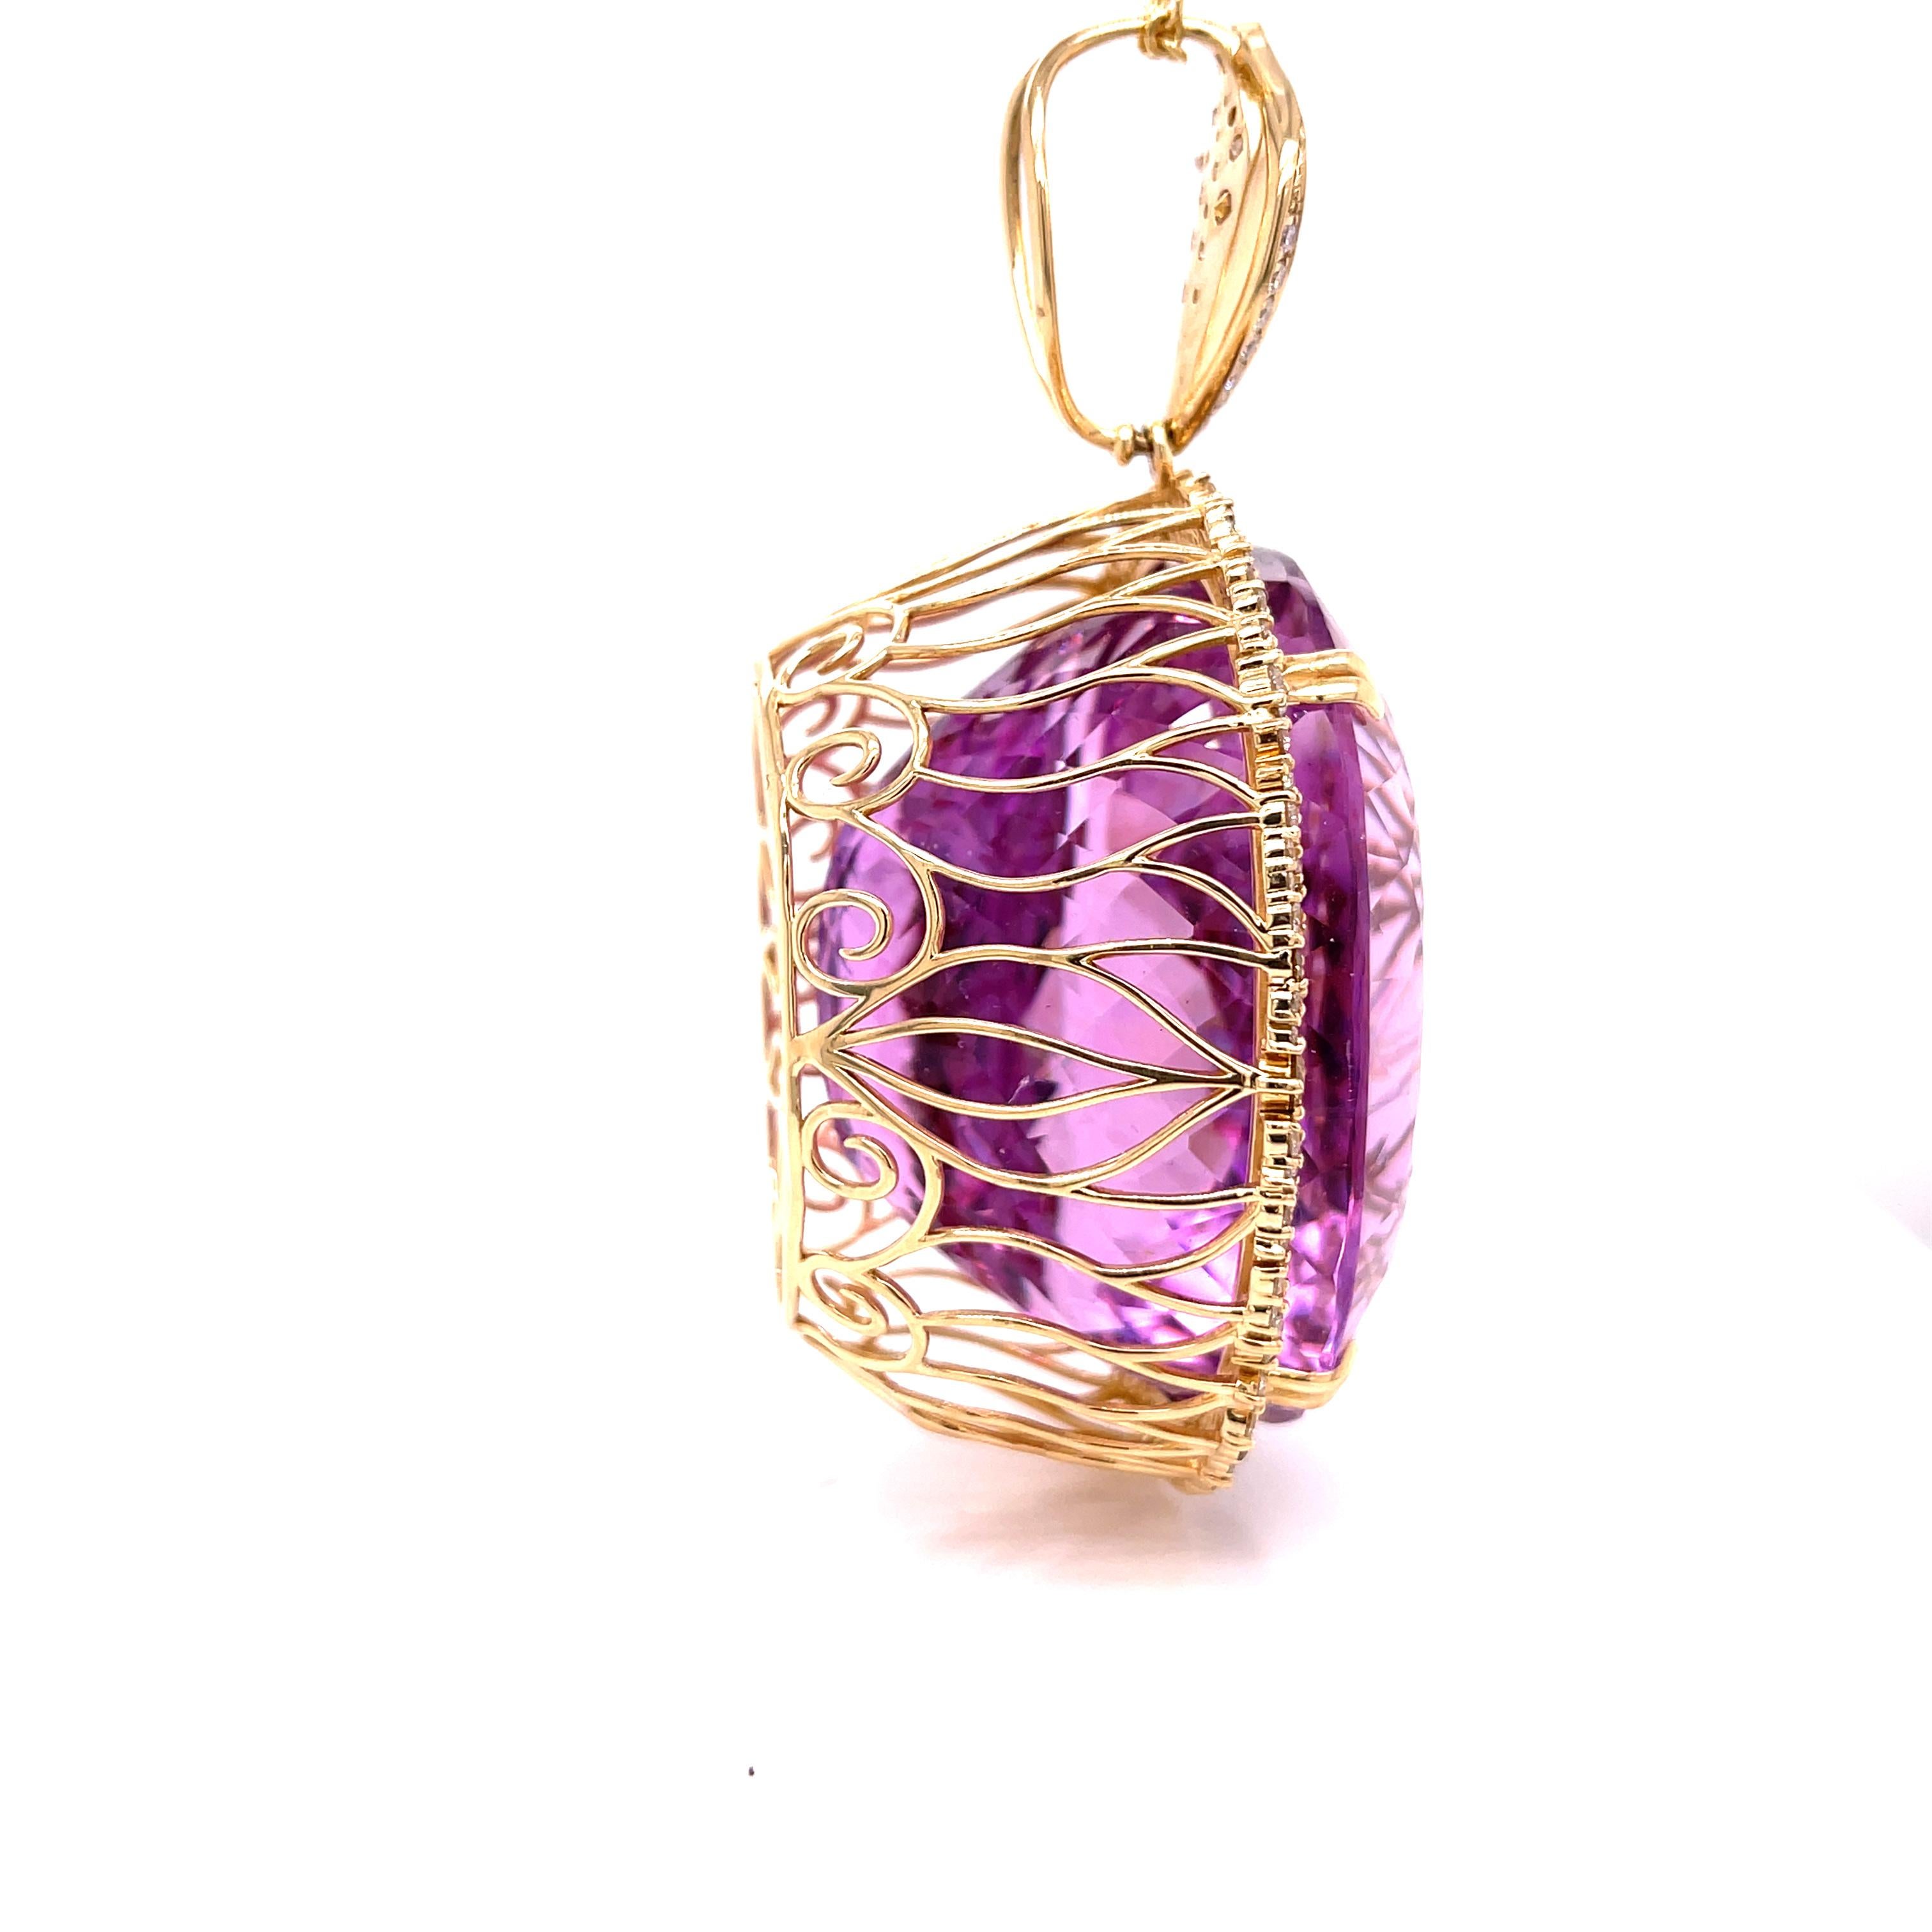 A stone which speaks volumes. A purple beauty, Oval Shaped Kunzite weighing approximately 352.52 Carats with a halo of Multi Colored Diamond weighing approximately, 1.00 cttw along with White Diamonds weighing approximately 3.20 cttw. This pendant